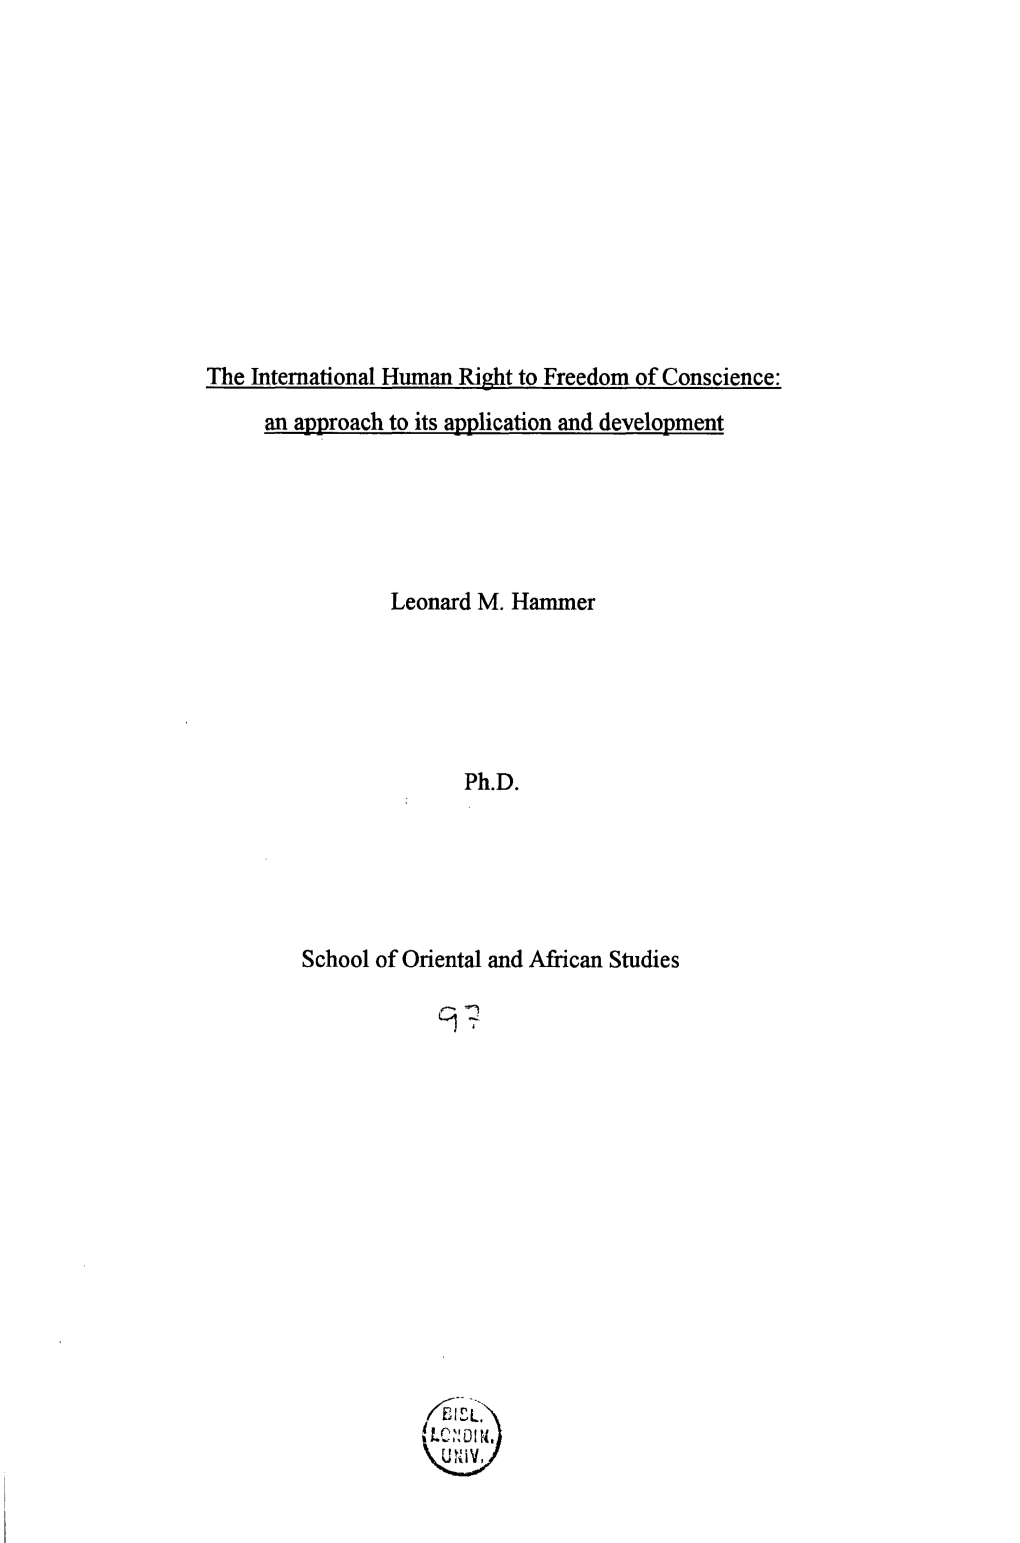 The International Human Right to Freedom of Conscience: an Approach to Its Application and Development